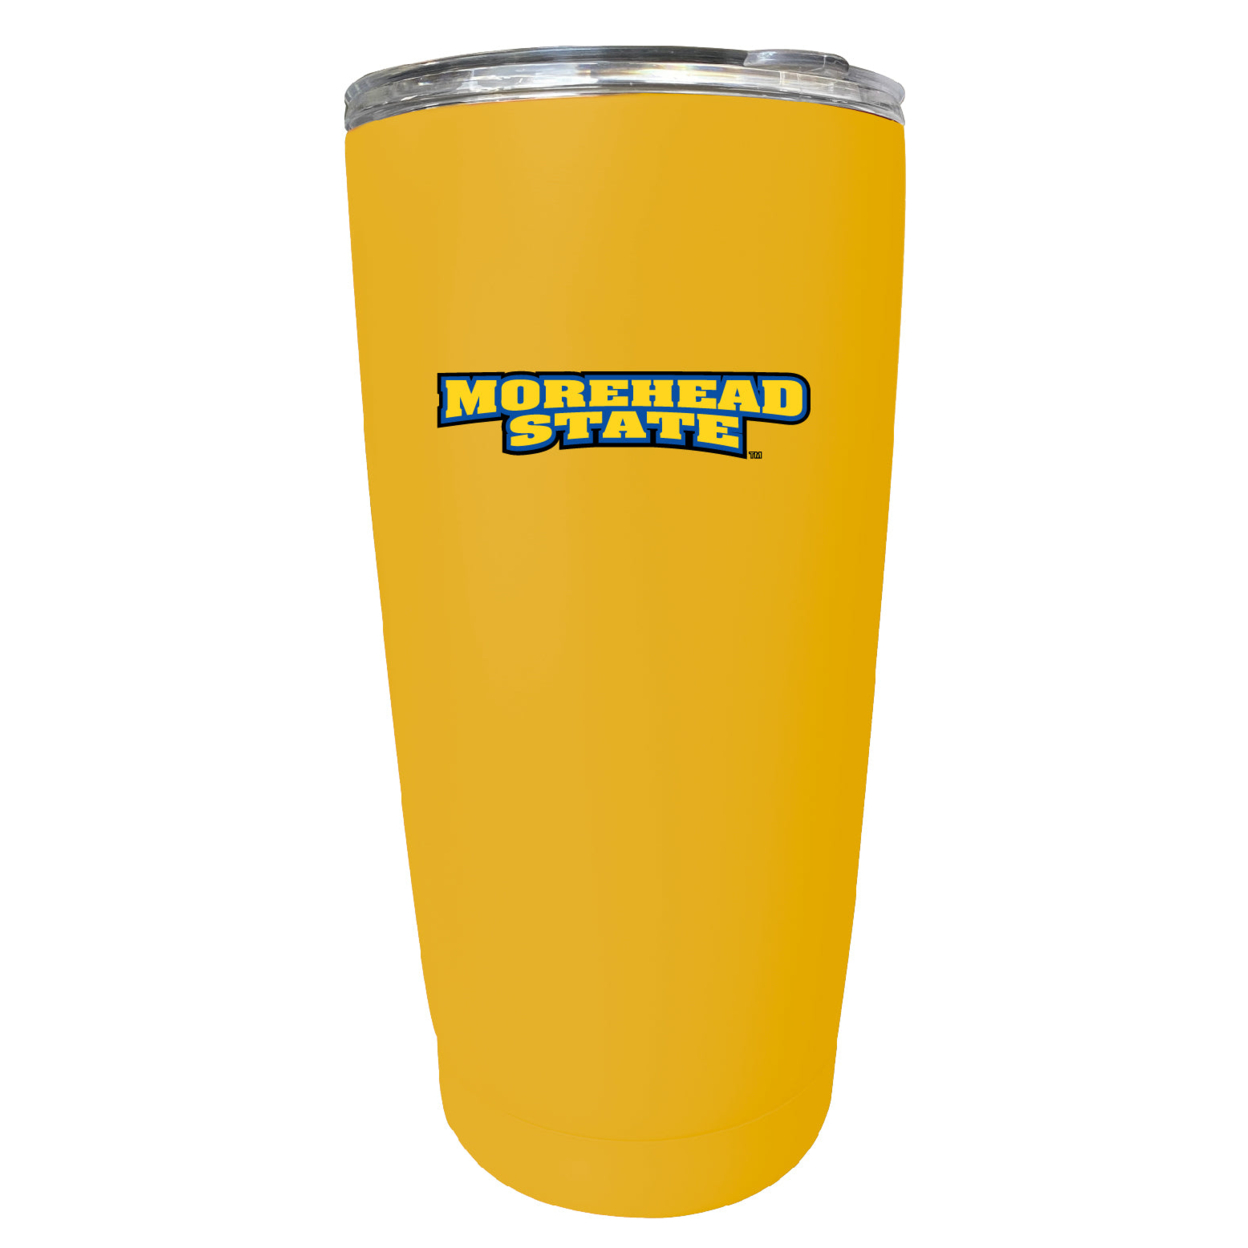 Morehead State University 16 Oz Stainless Steel Insulated Tumbler - Gray